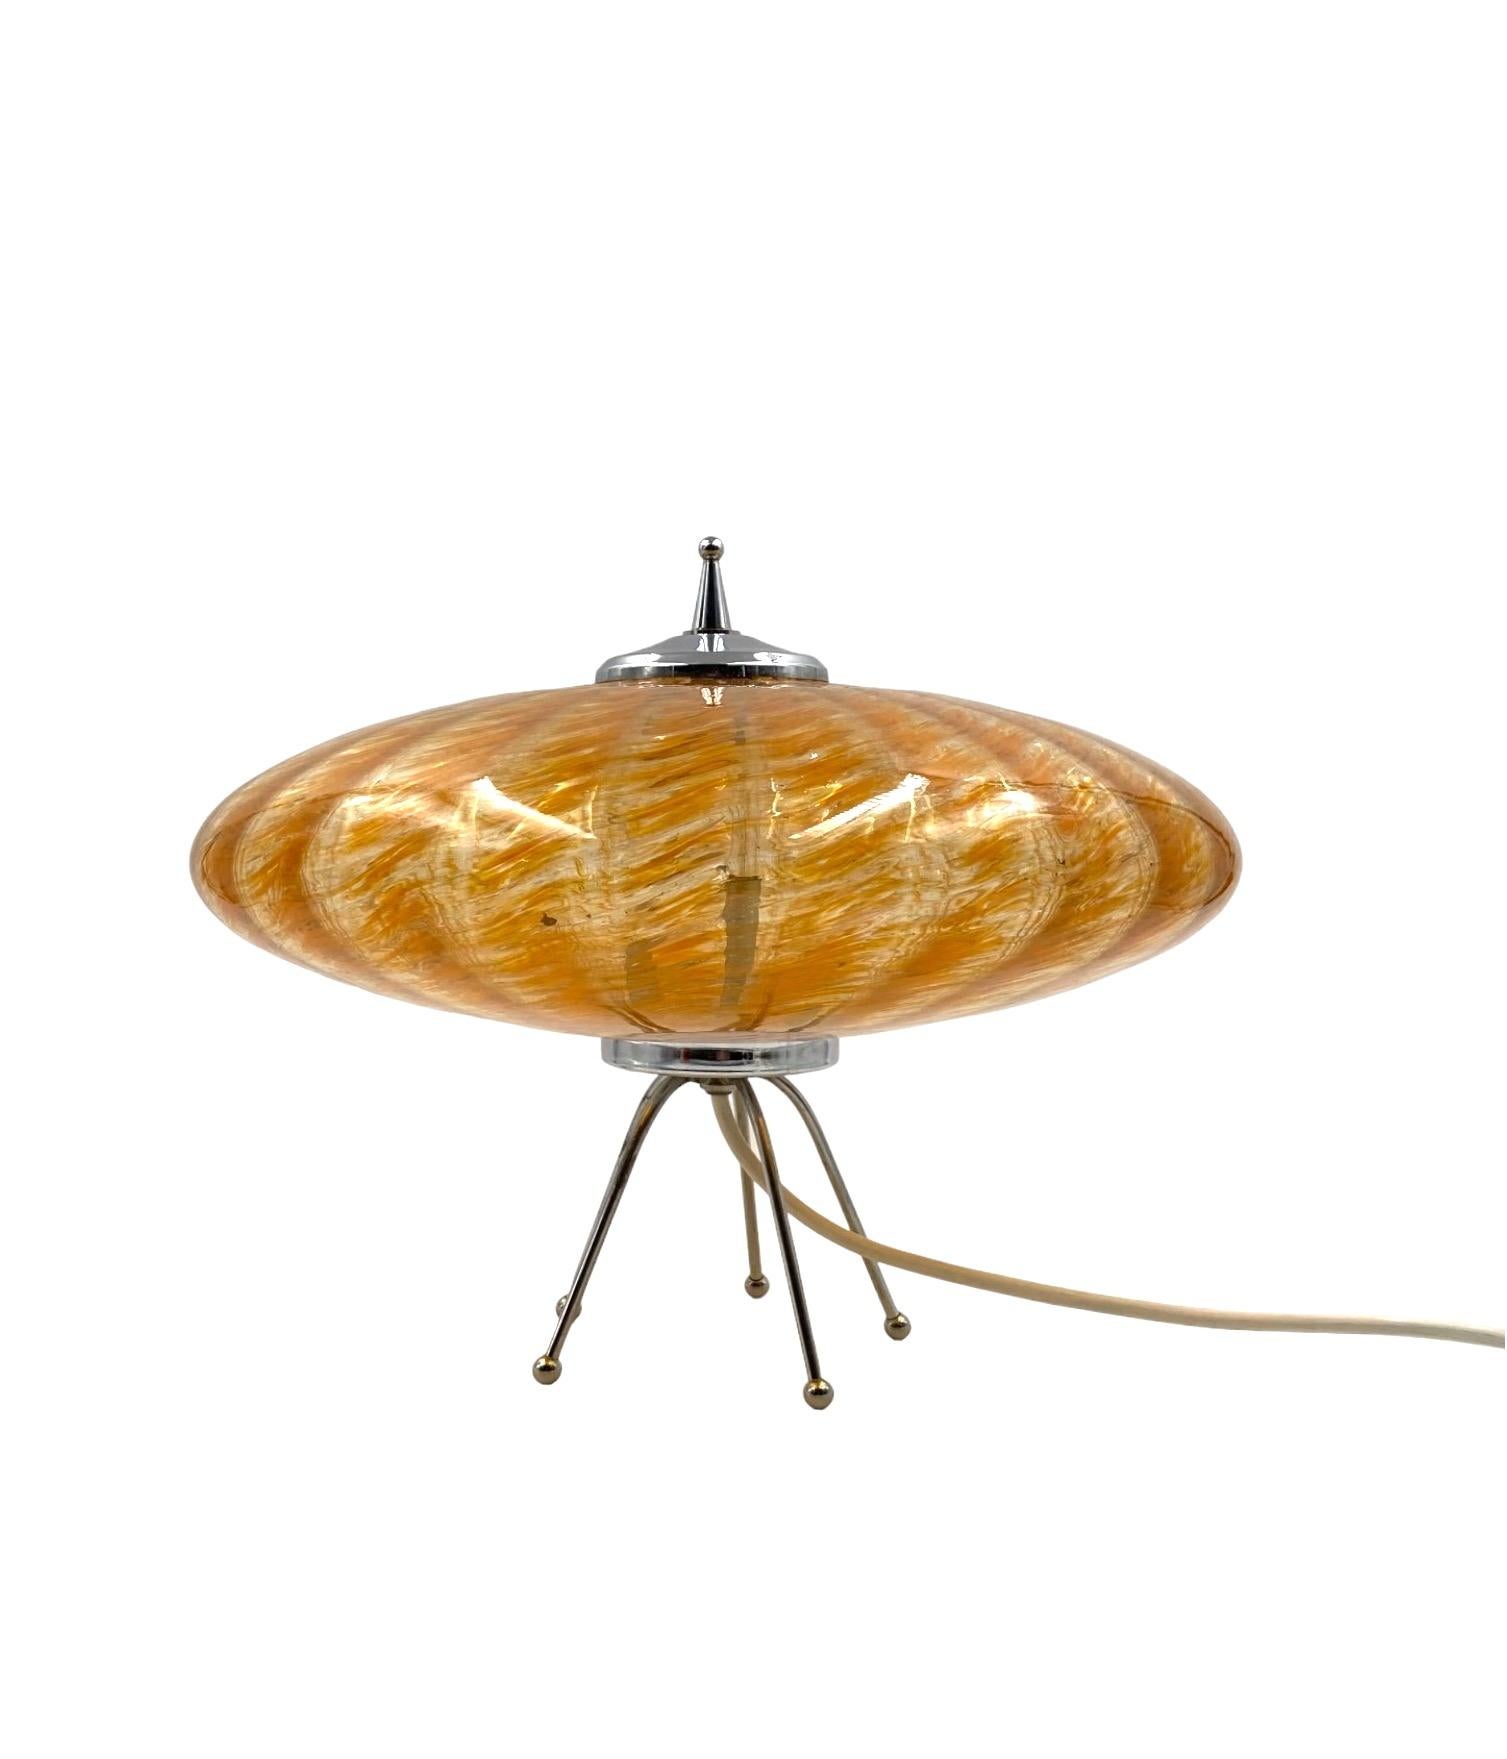 Murano orange glass flying saucer Ufo table lamp, Murano Italy 1970s For Sale 1